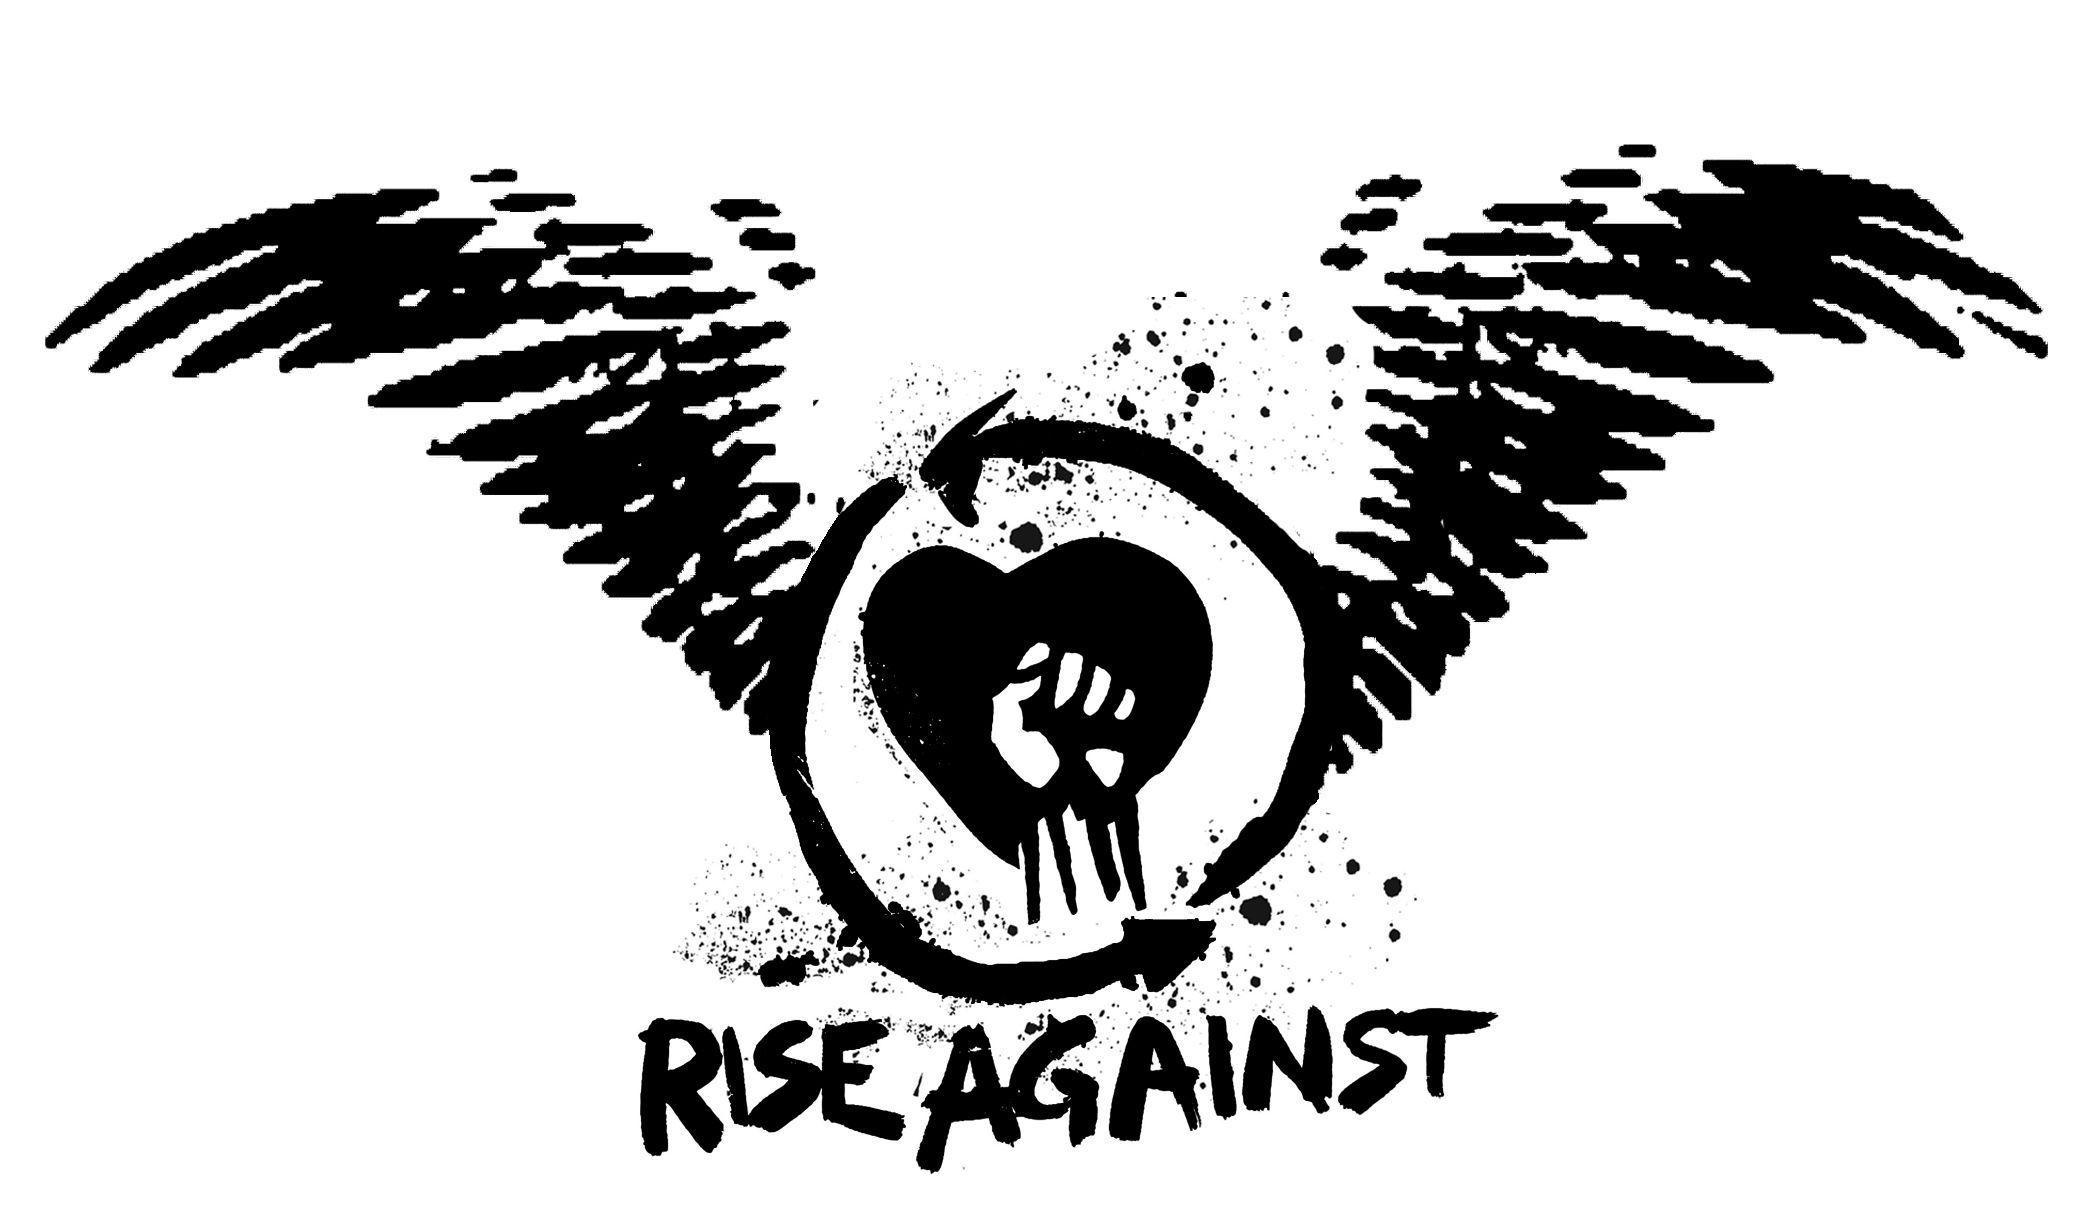 The Birds Band Logo - Rise Against - Awesome band image - APOTHECARY888 - Mod DB | Bands ...